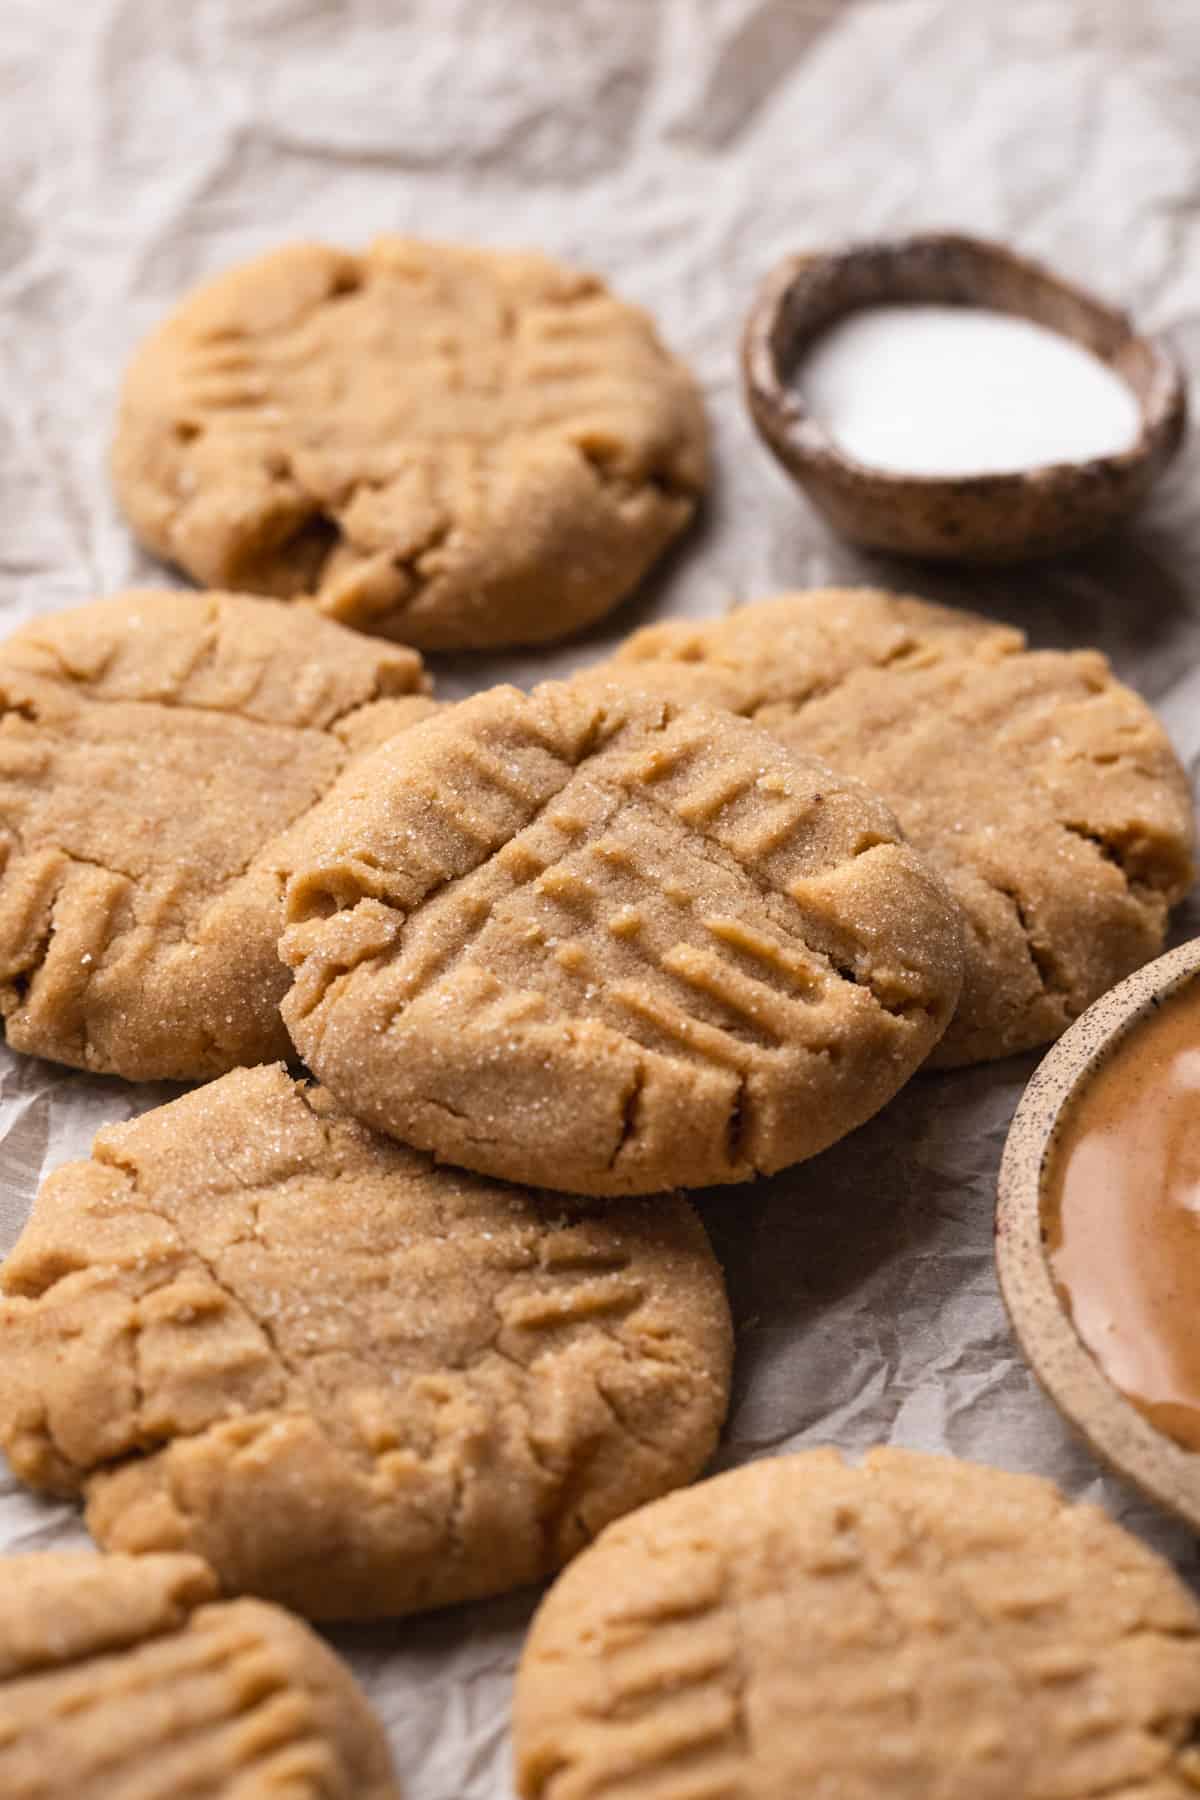 Cookies laying on crinkled parchment paper with bowls of sugar and peanut butter.